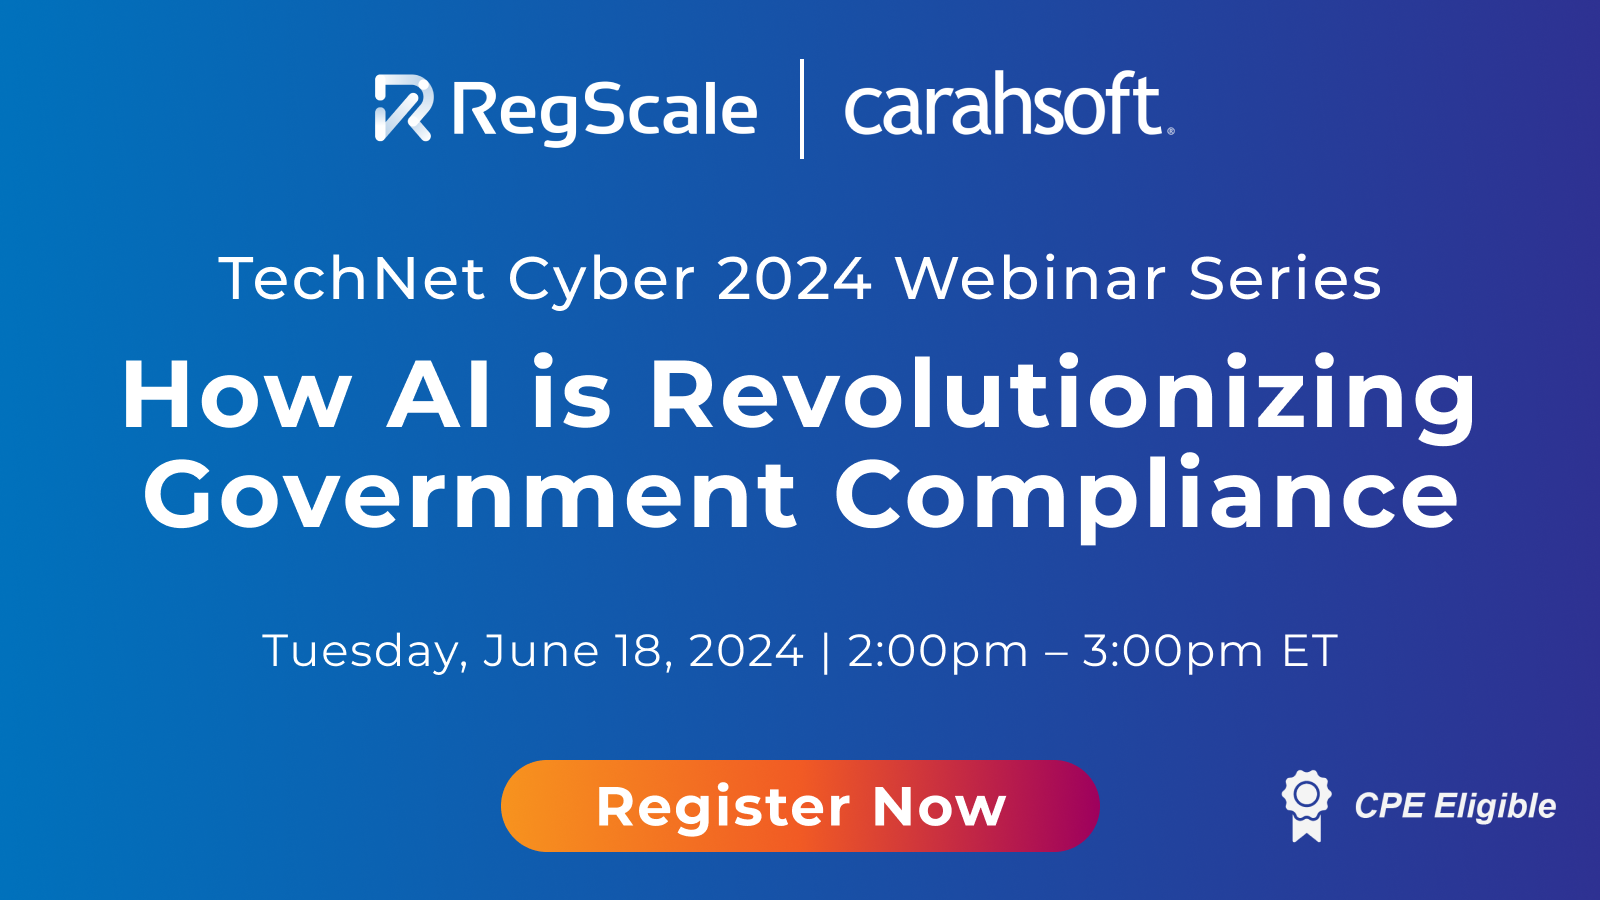 TechNet Cyber 2024 Webinar Series: How AI is Revolutionizing Government Compliance with Carahsoft and RegScale | June 18,2024 | 2:00pm - 3:00pm ET